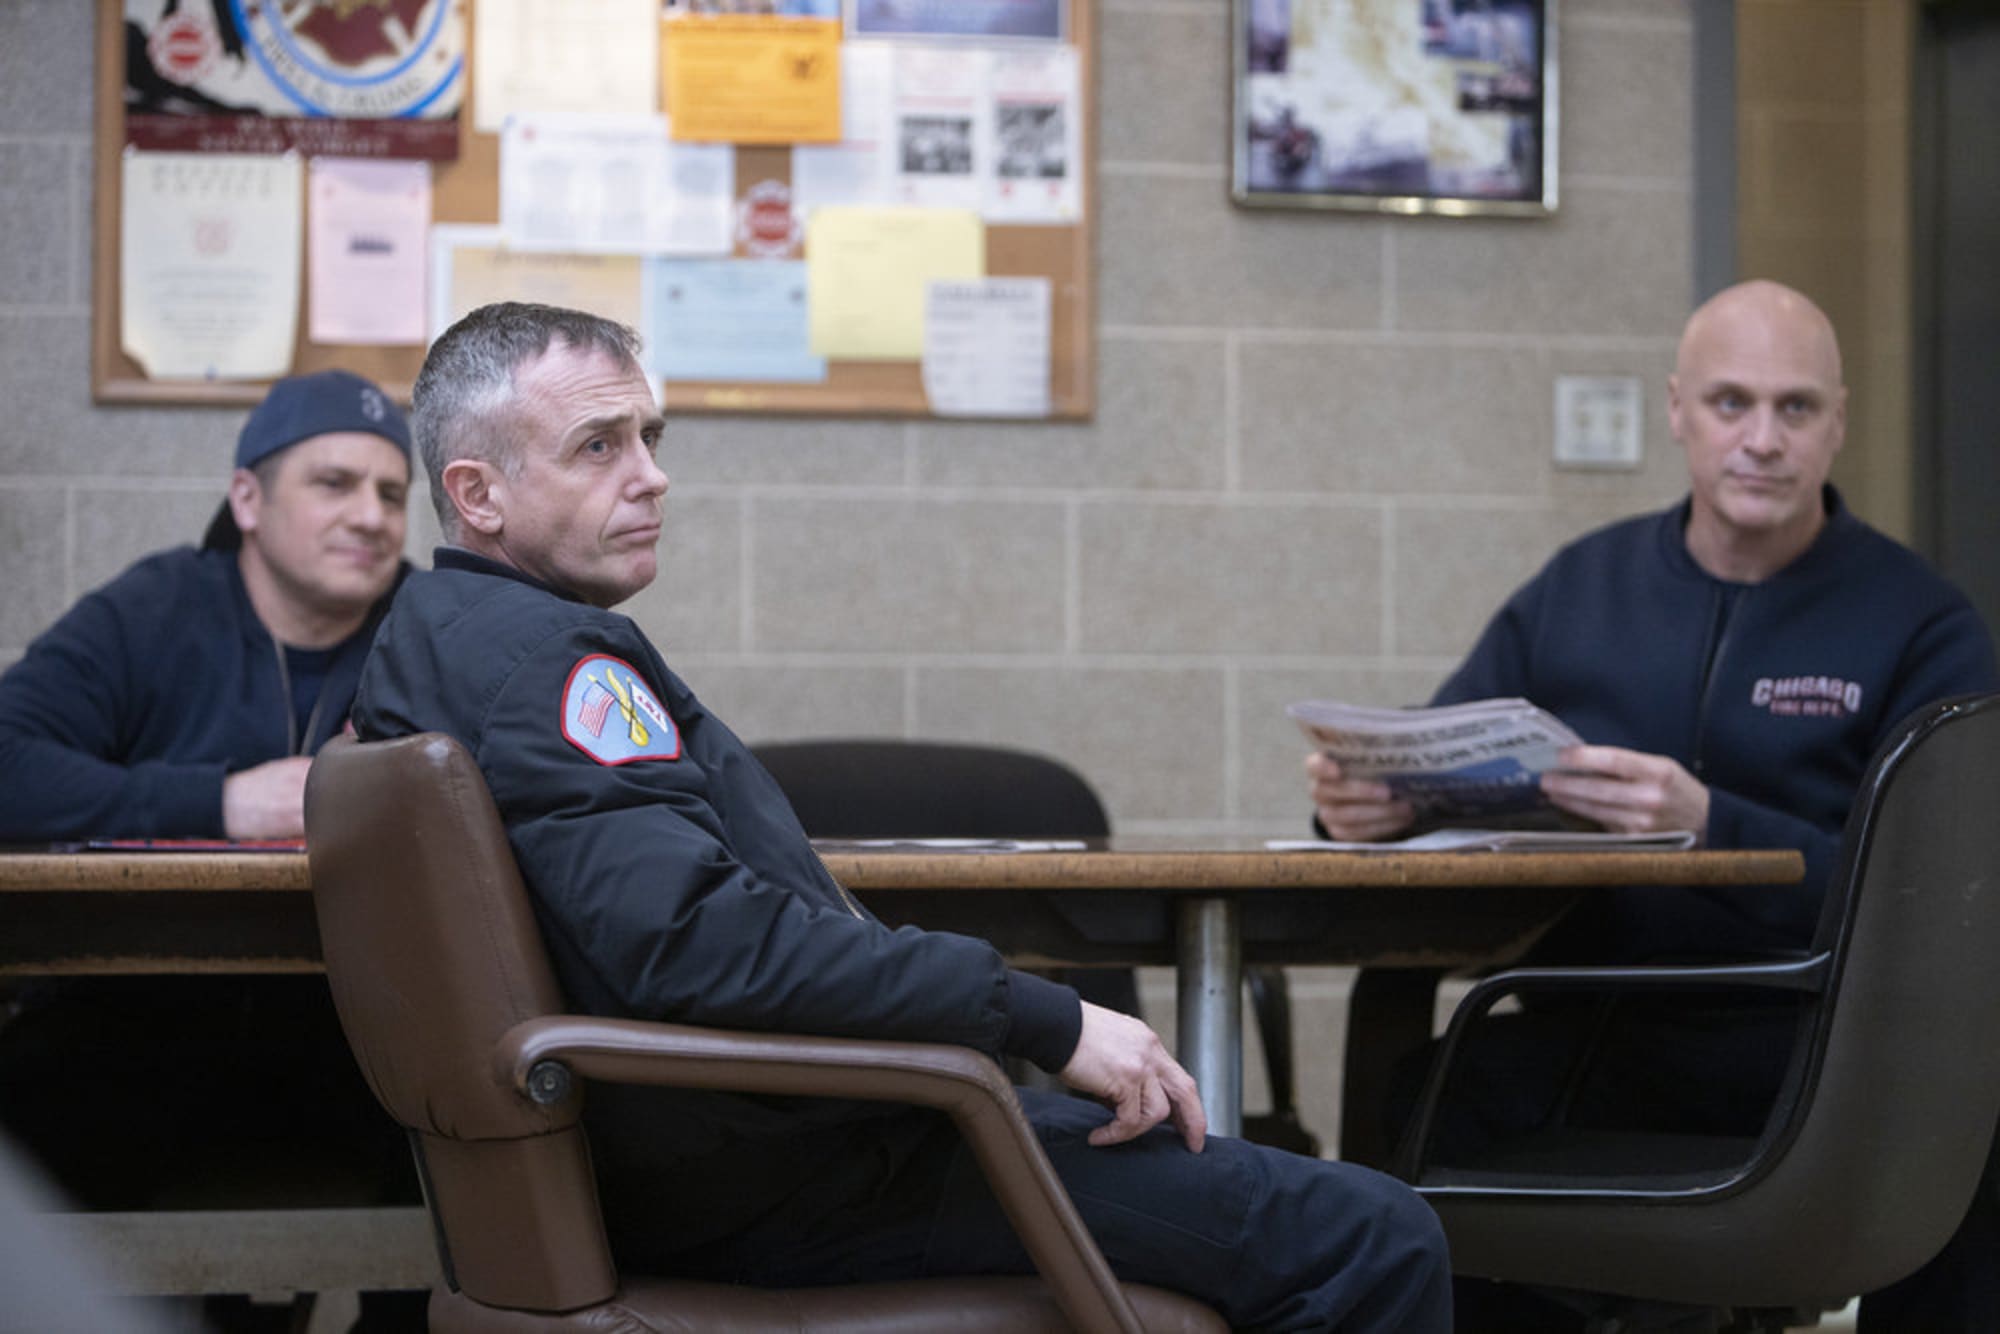 rerun of chicago fire halloween 2020 episode Chicago Fire Tv Schedule For April 2020 What S New And Reruns rerun of chicago fire halloween 2020 episode